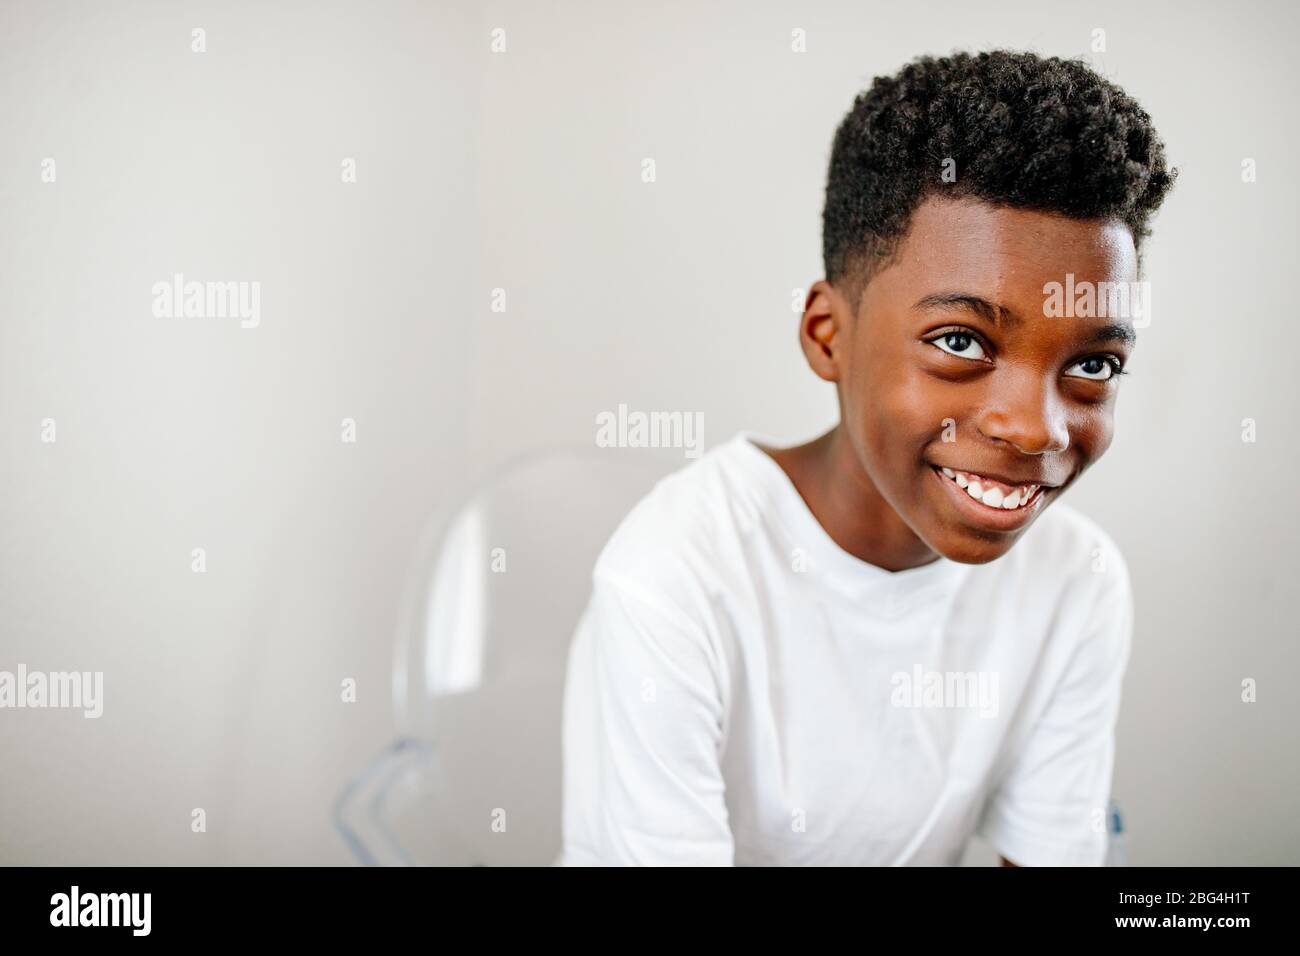 Smiling black boy with big brown eyes clear acrylic chair looking up Stock Photo